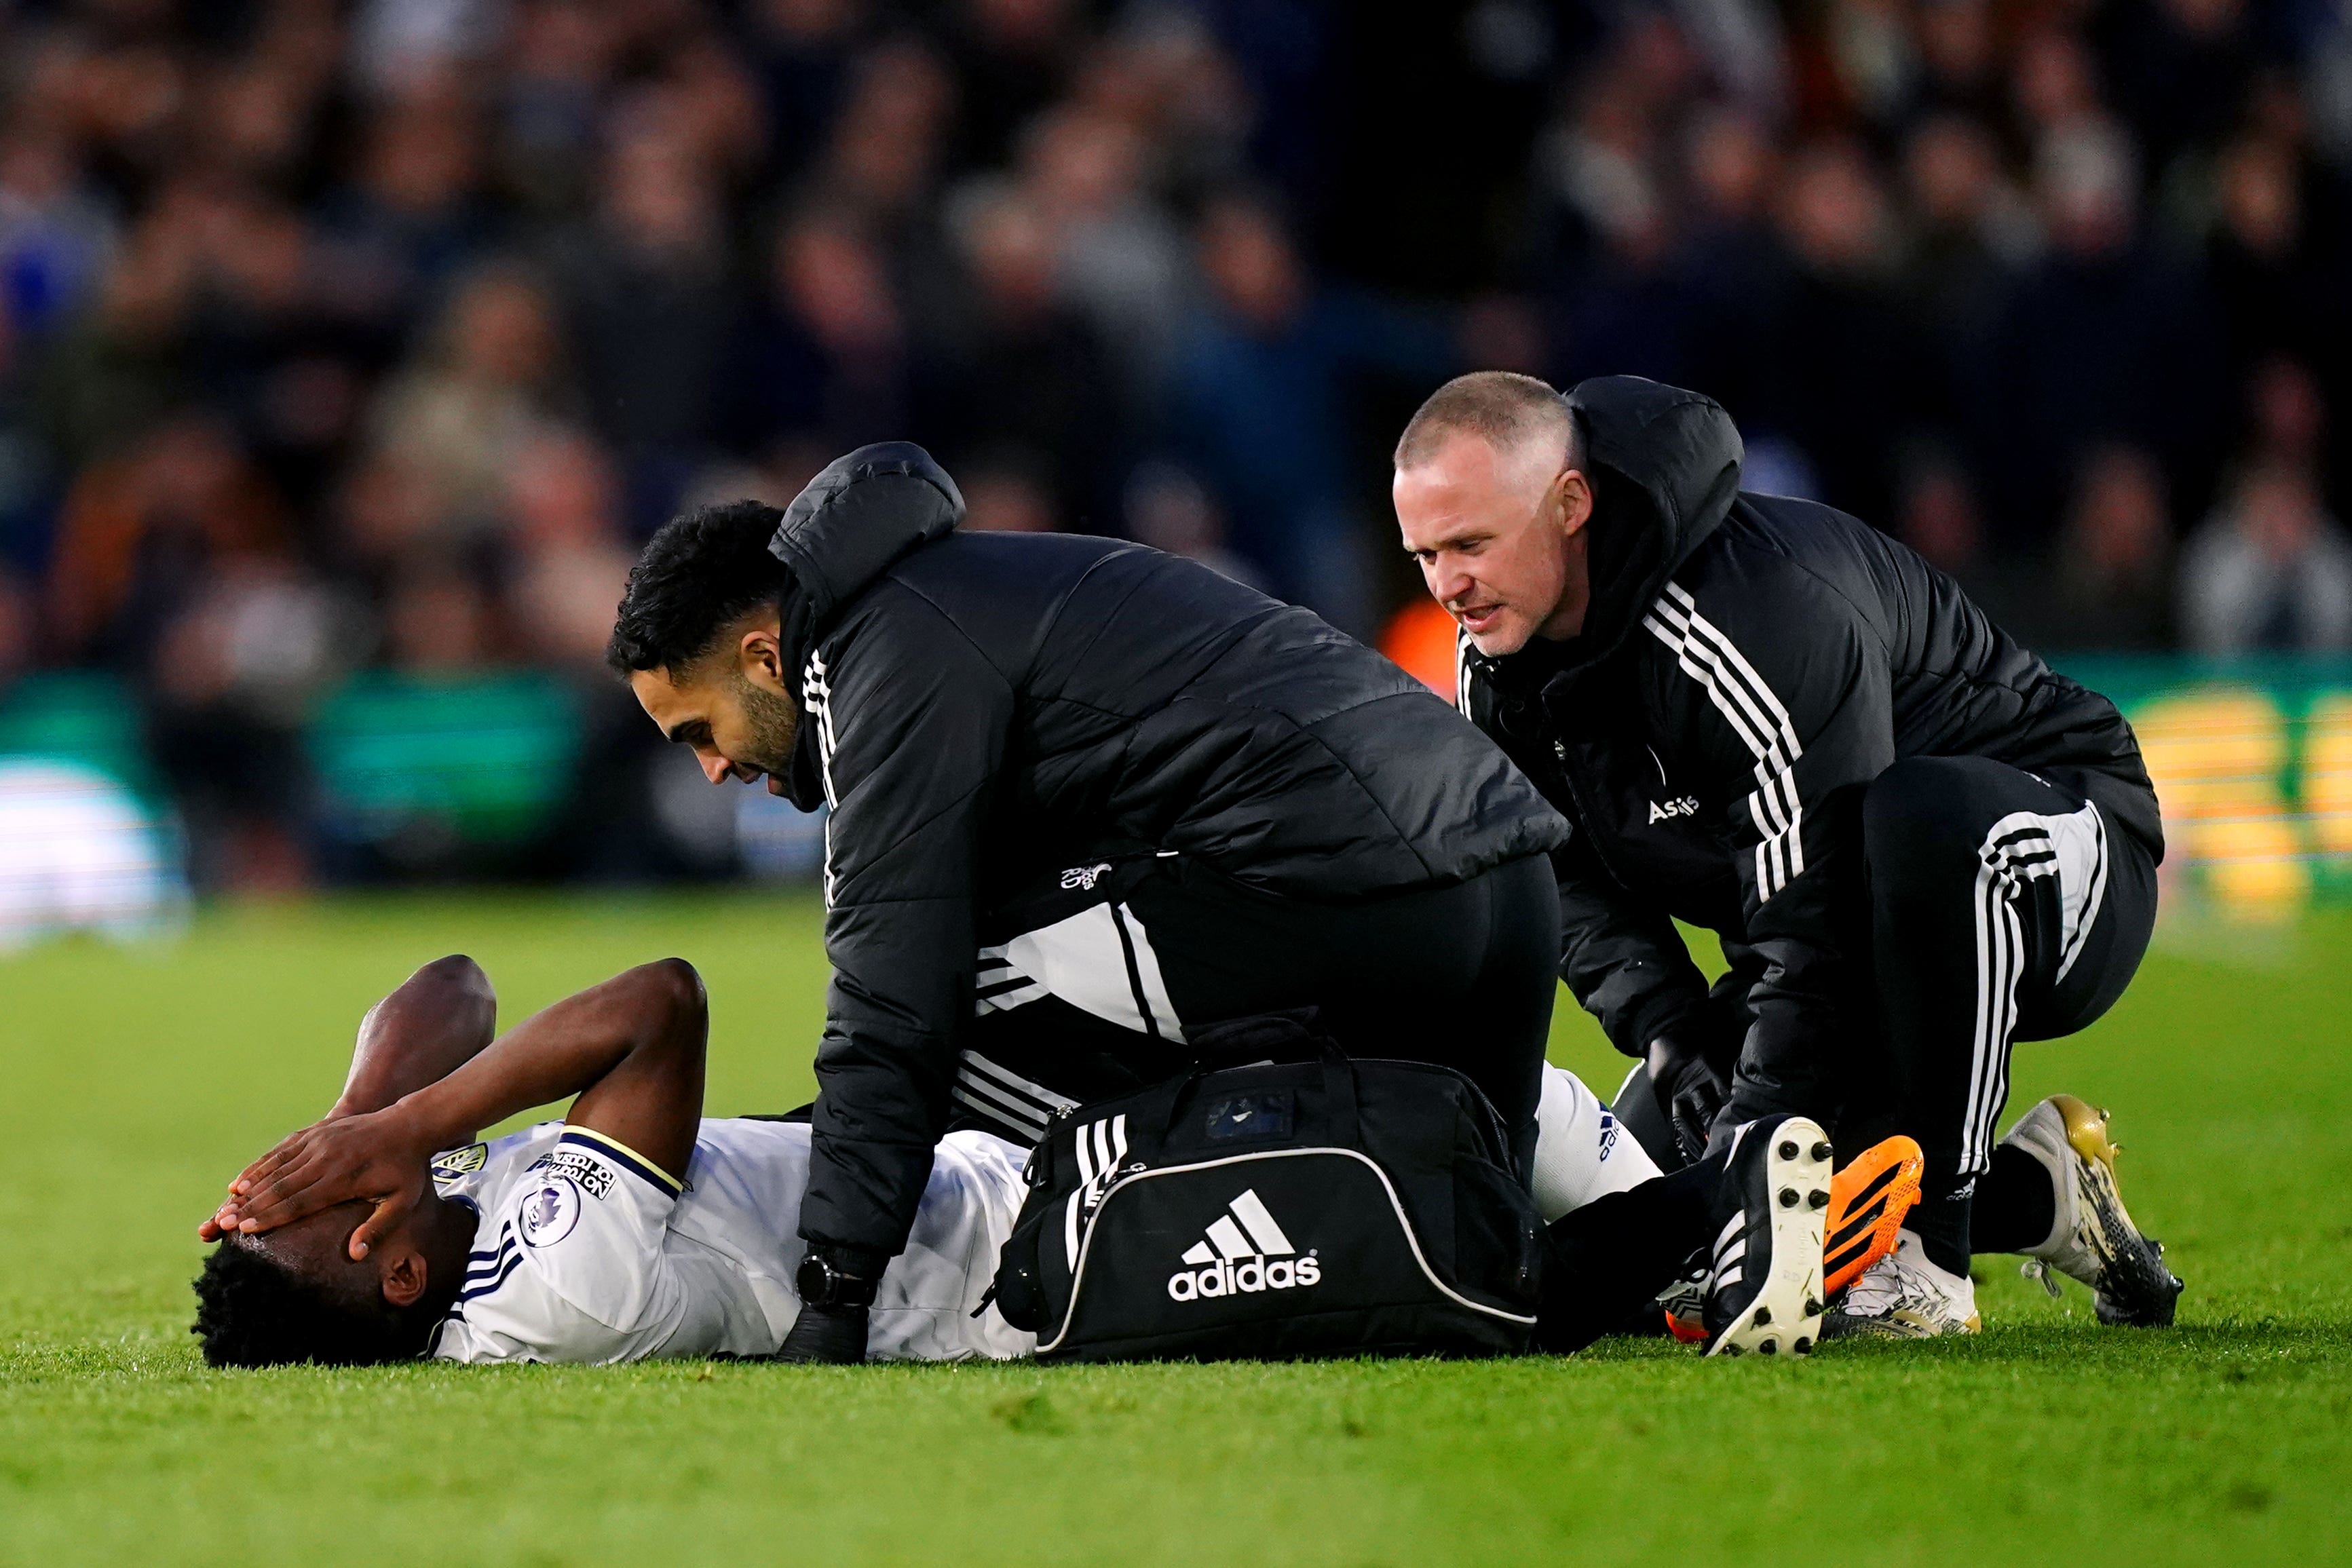 Luis Sinisterra will play no further part for Leeds this season after injuring his ankle against Leicester (Mike Egerton/PA)